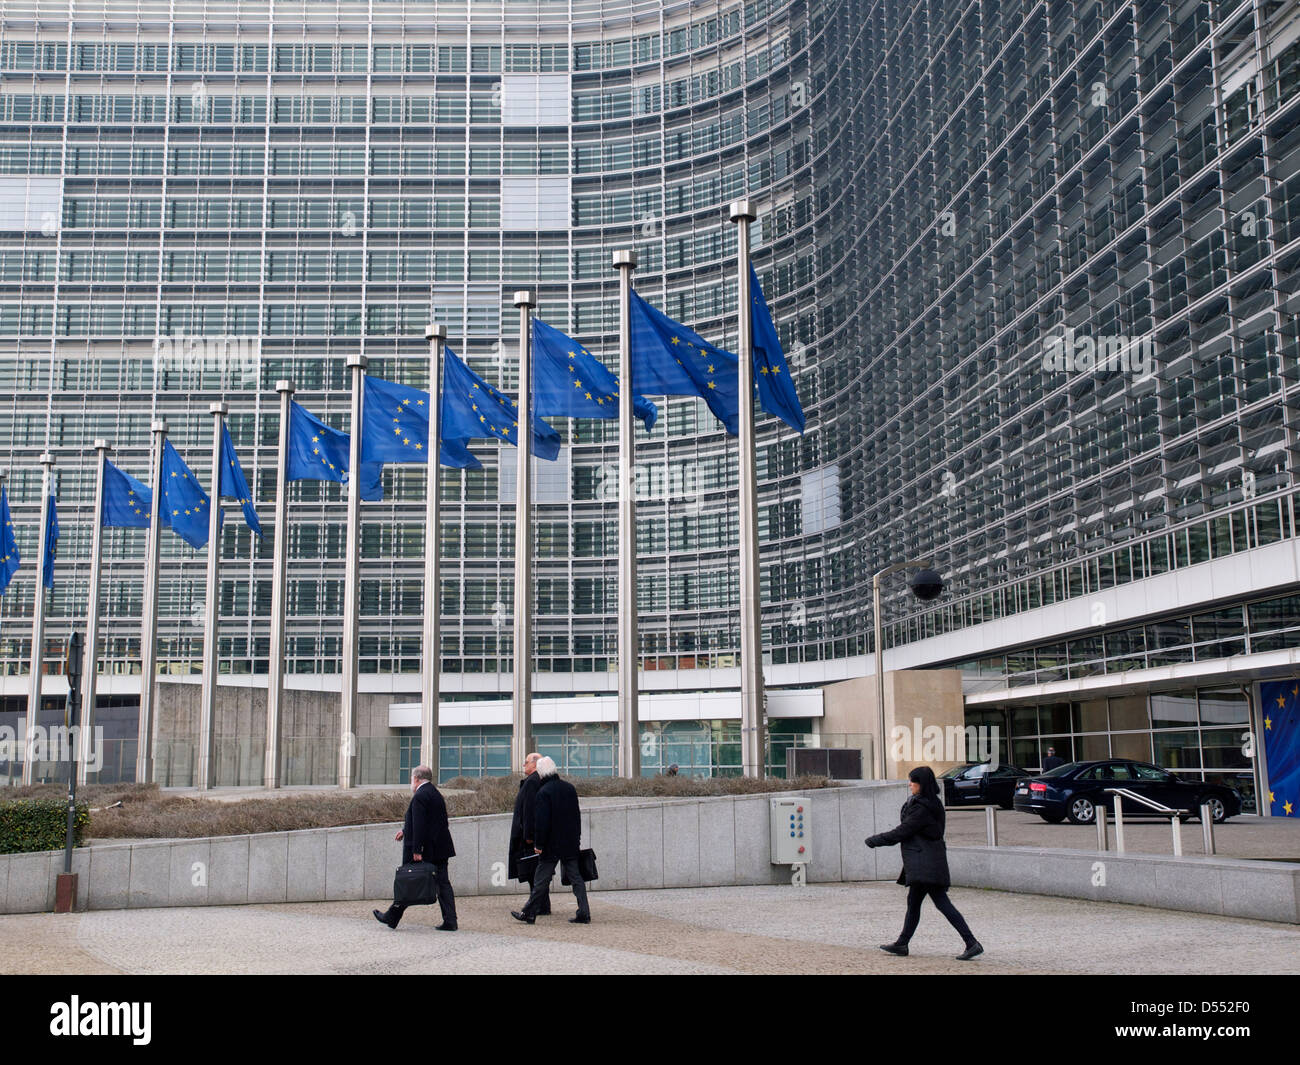 People at the Berlaymont European Commission building in Brussels, Belgium Stock Photo